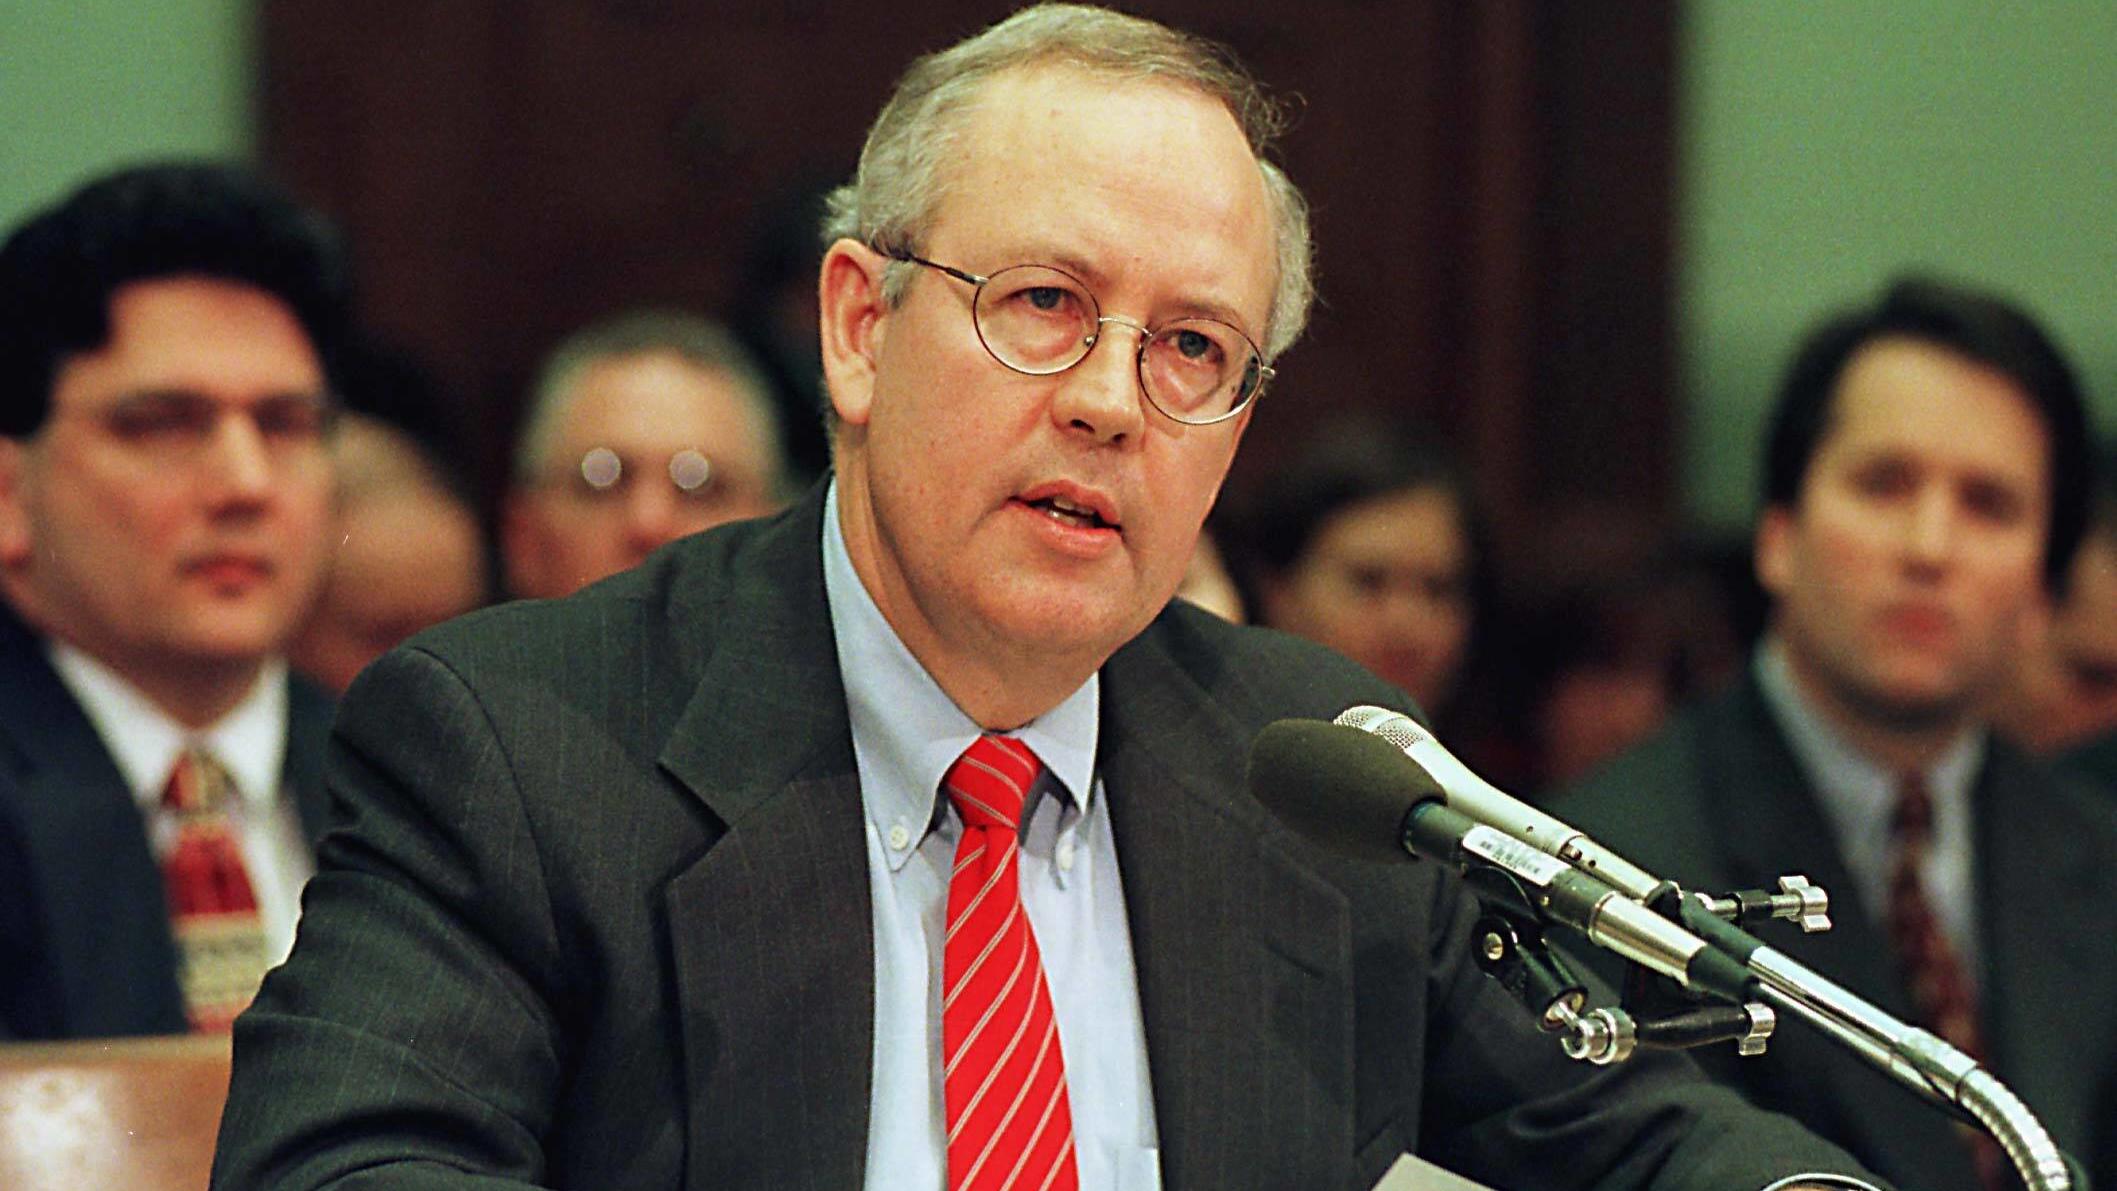 November 19, 1998, Washington, District of Columbia, USA: Special Prosecutor Kenneth Starr testifies during a United States House Judiciary Committee hearing on pending Articles of Impeachment against U.S. President Bill Clinton on Capitol Hill in Wa